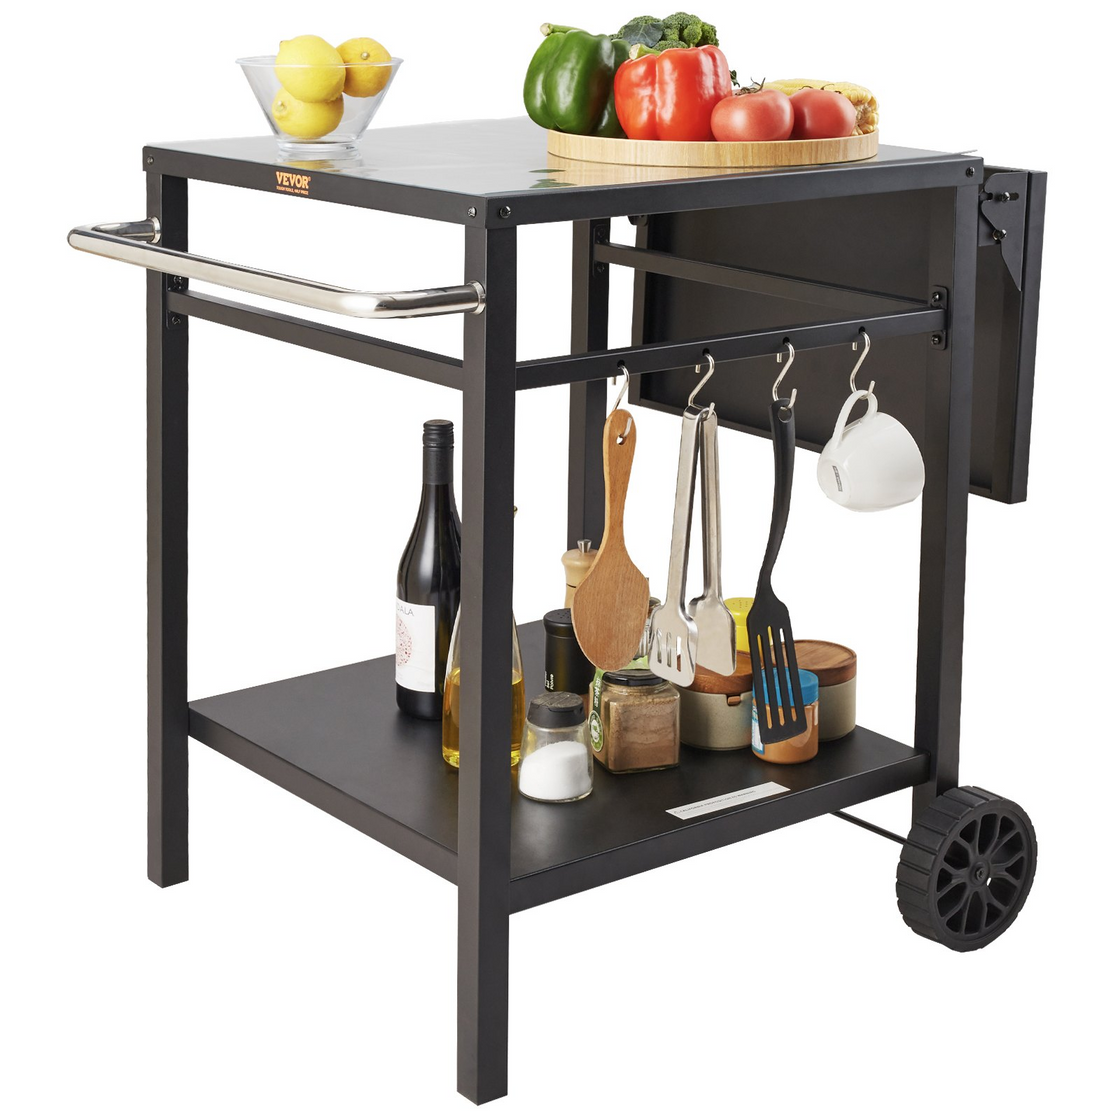 VEVOR Outdoor Grill Dining Cart with Double-Shelf | BBQ Movable Food Prep Table